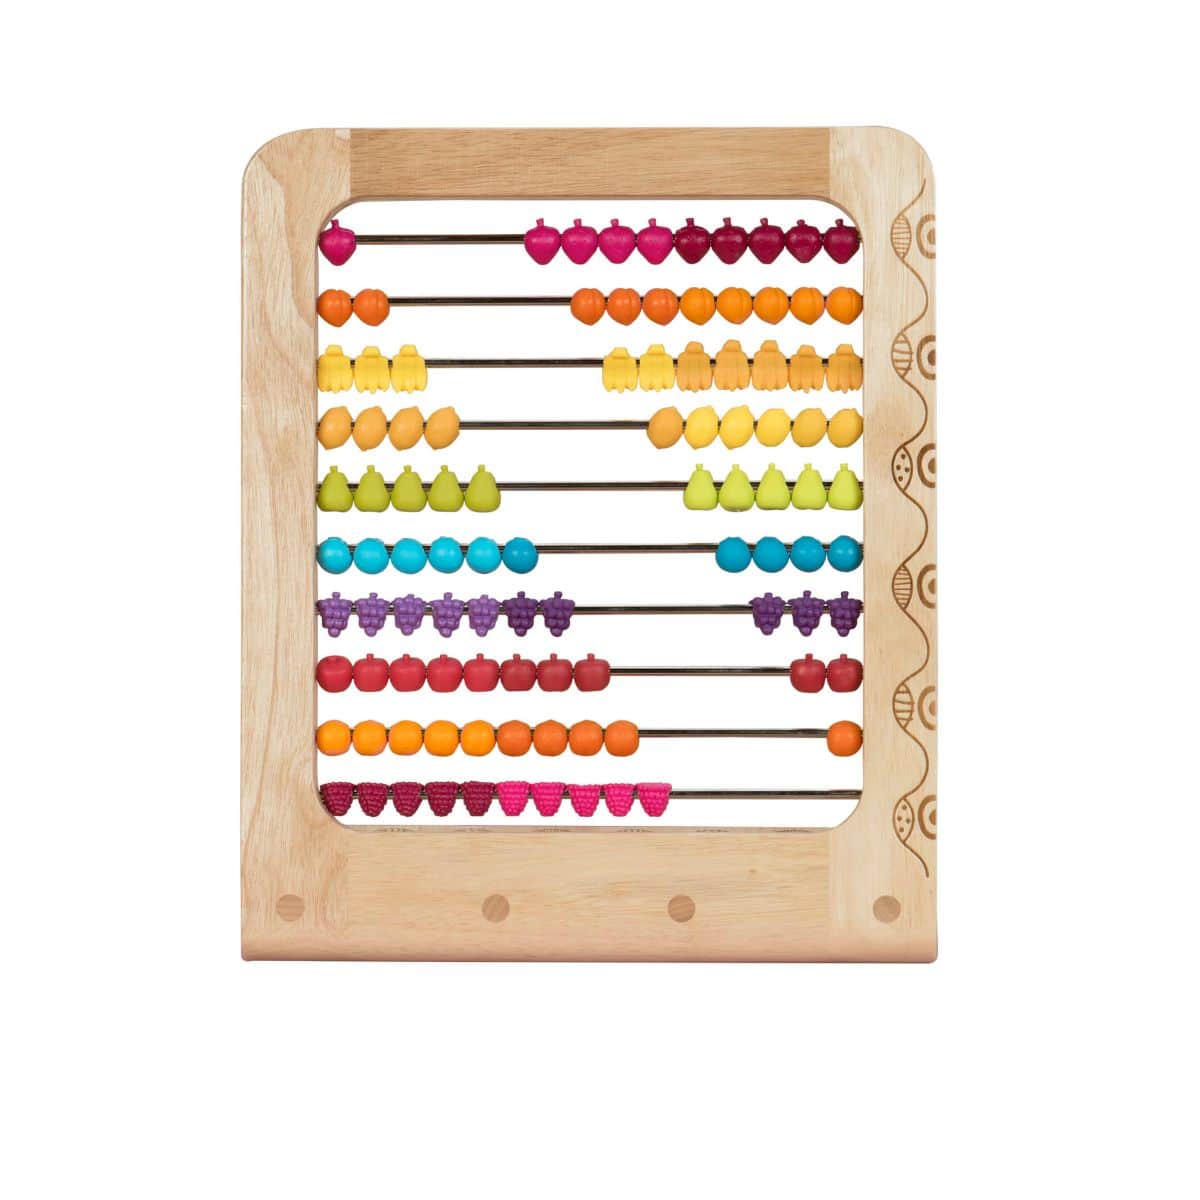 B. toys Wooden Abacus Counting Toy - Two-ty Fruity!